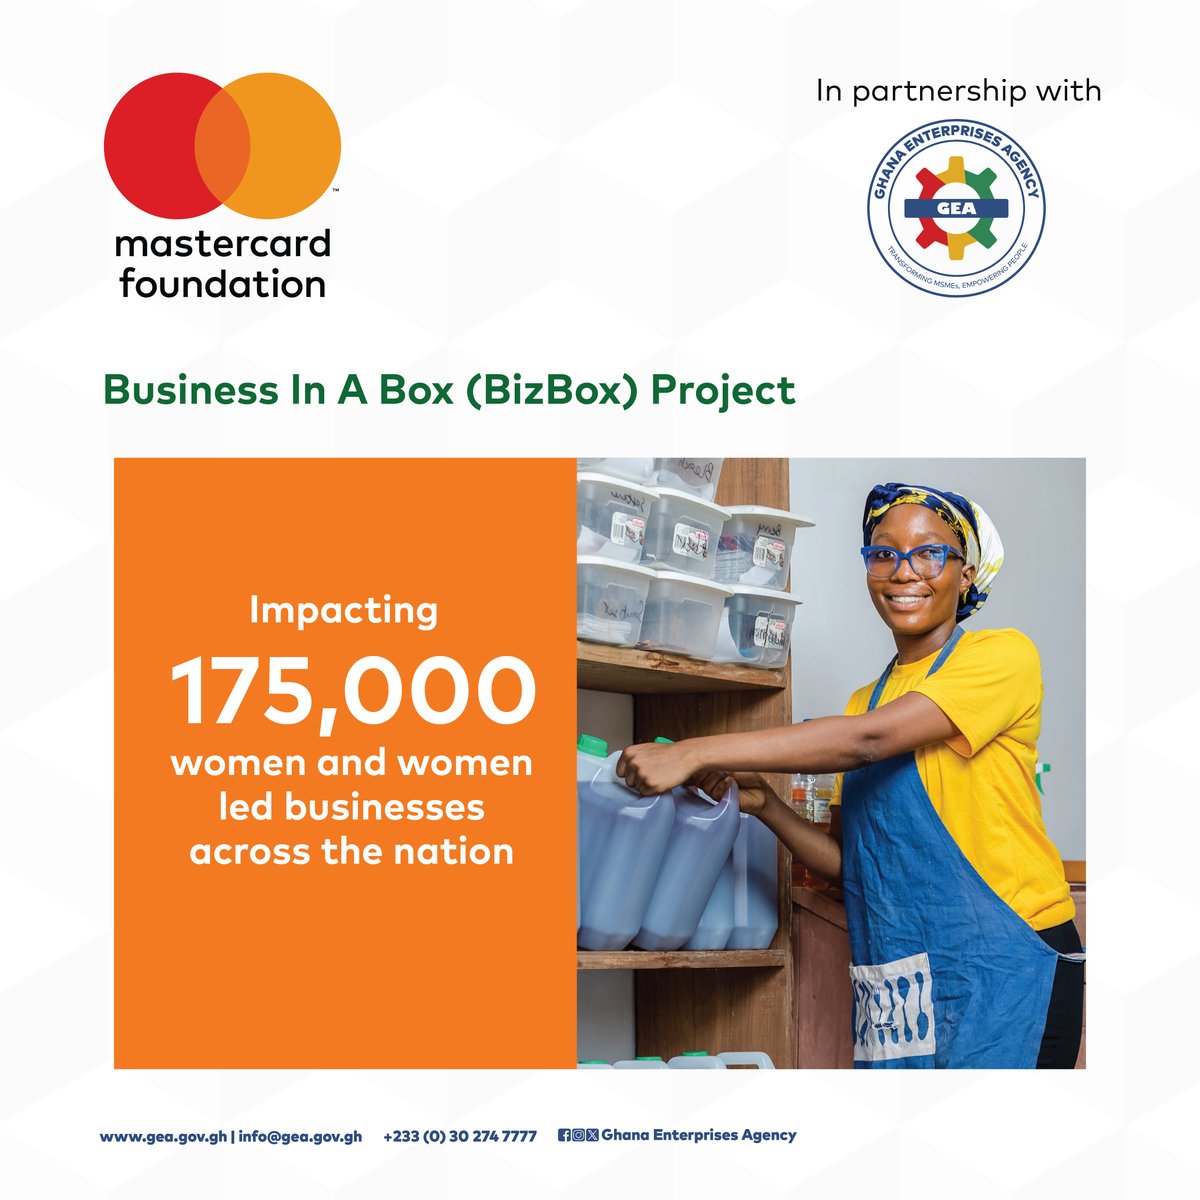 In a world where barriers often outweigh opportunities, the Business In A Box (BizBox) Project emerges as a catalyst for change, breaking down obstacles and paving the path to success for 175,000 determined women. #BizBox #GEA #Empowerment #BizBoxSuccess #BreakingBarriers